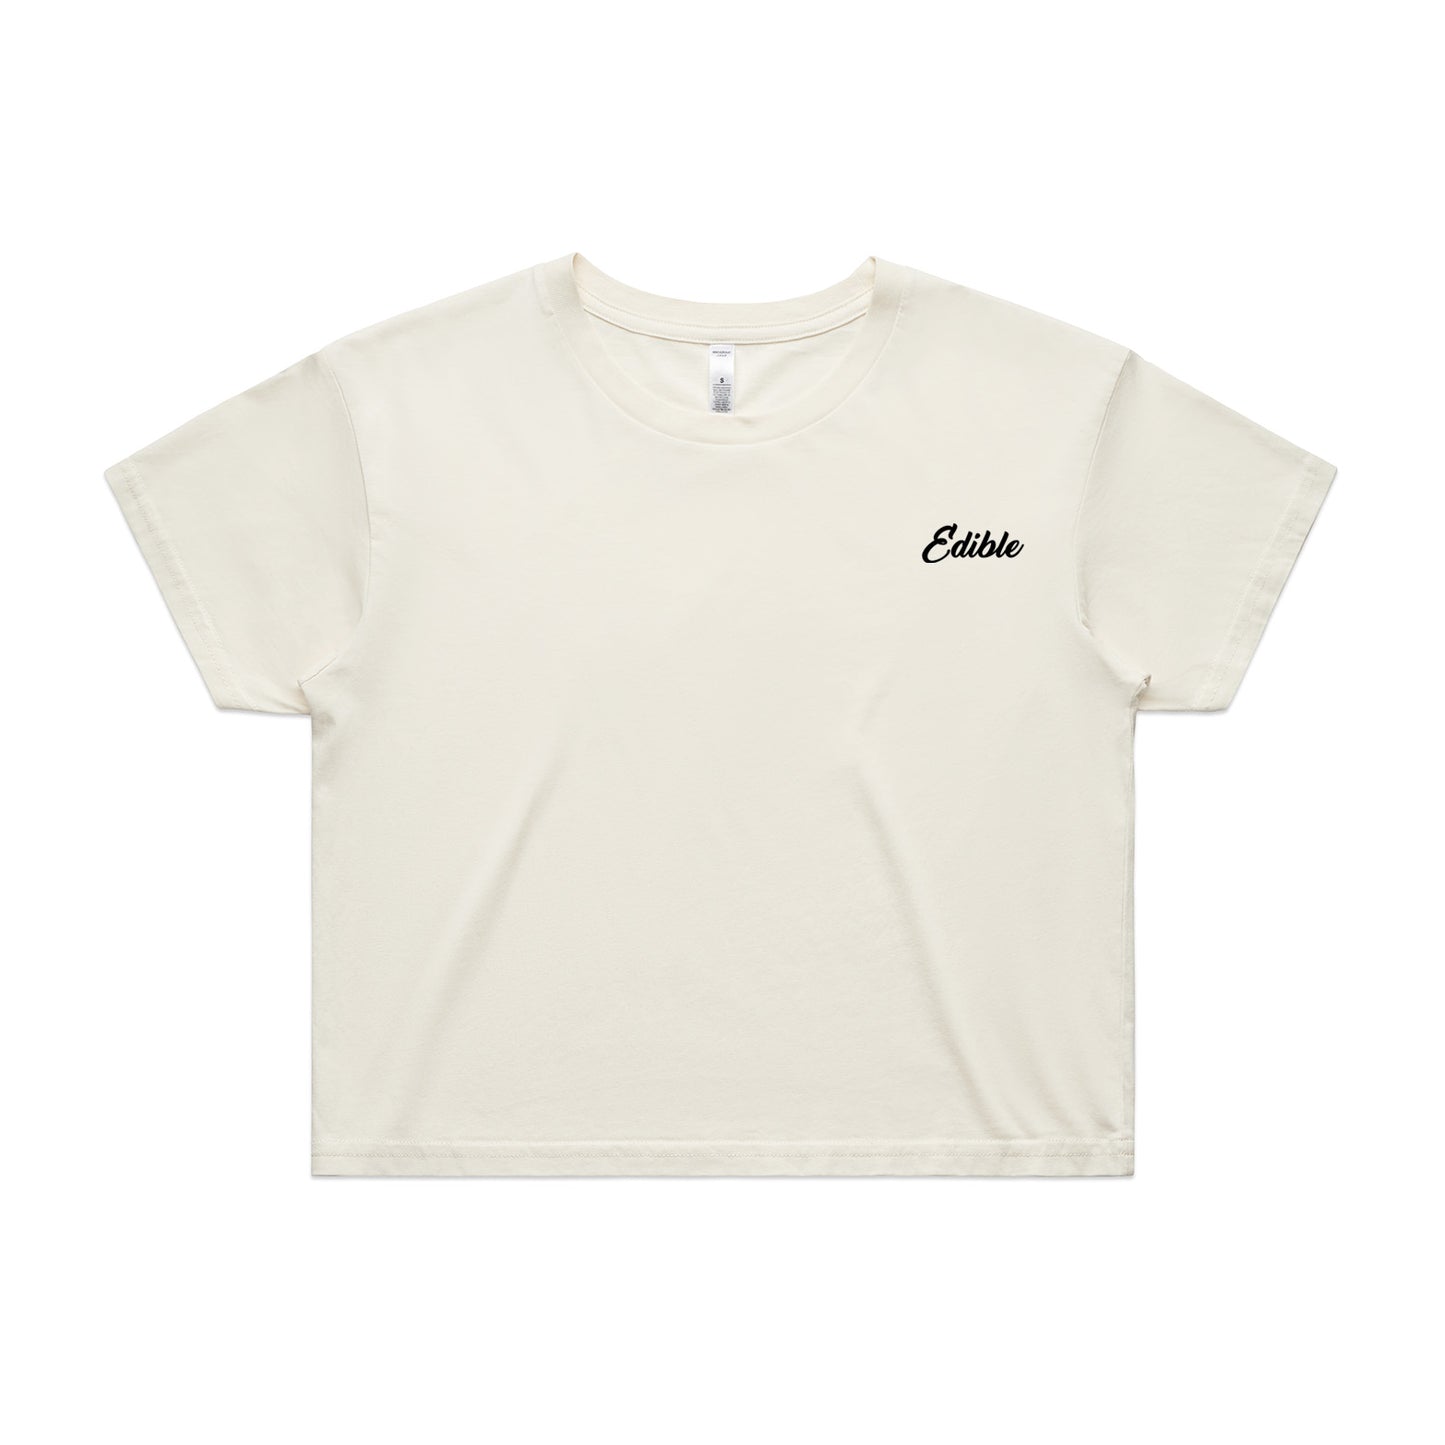 "Edible" Embroidered Women's Crop Top T-Shirt